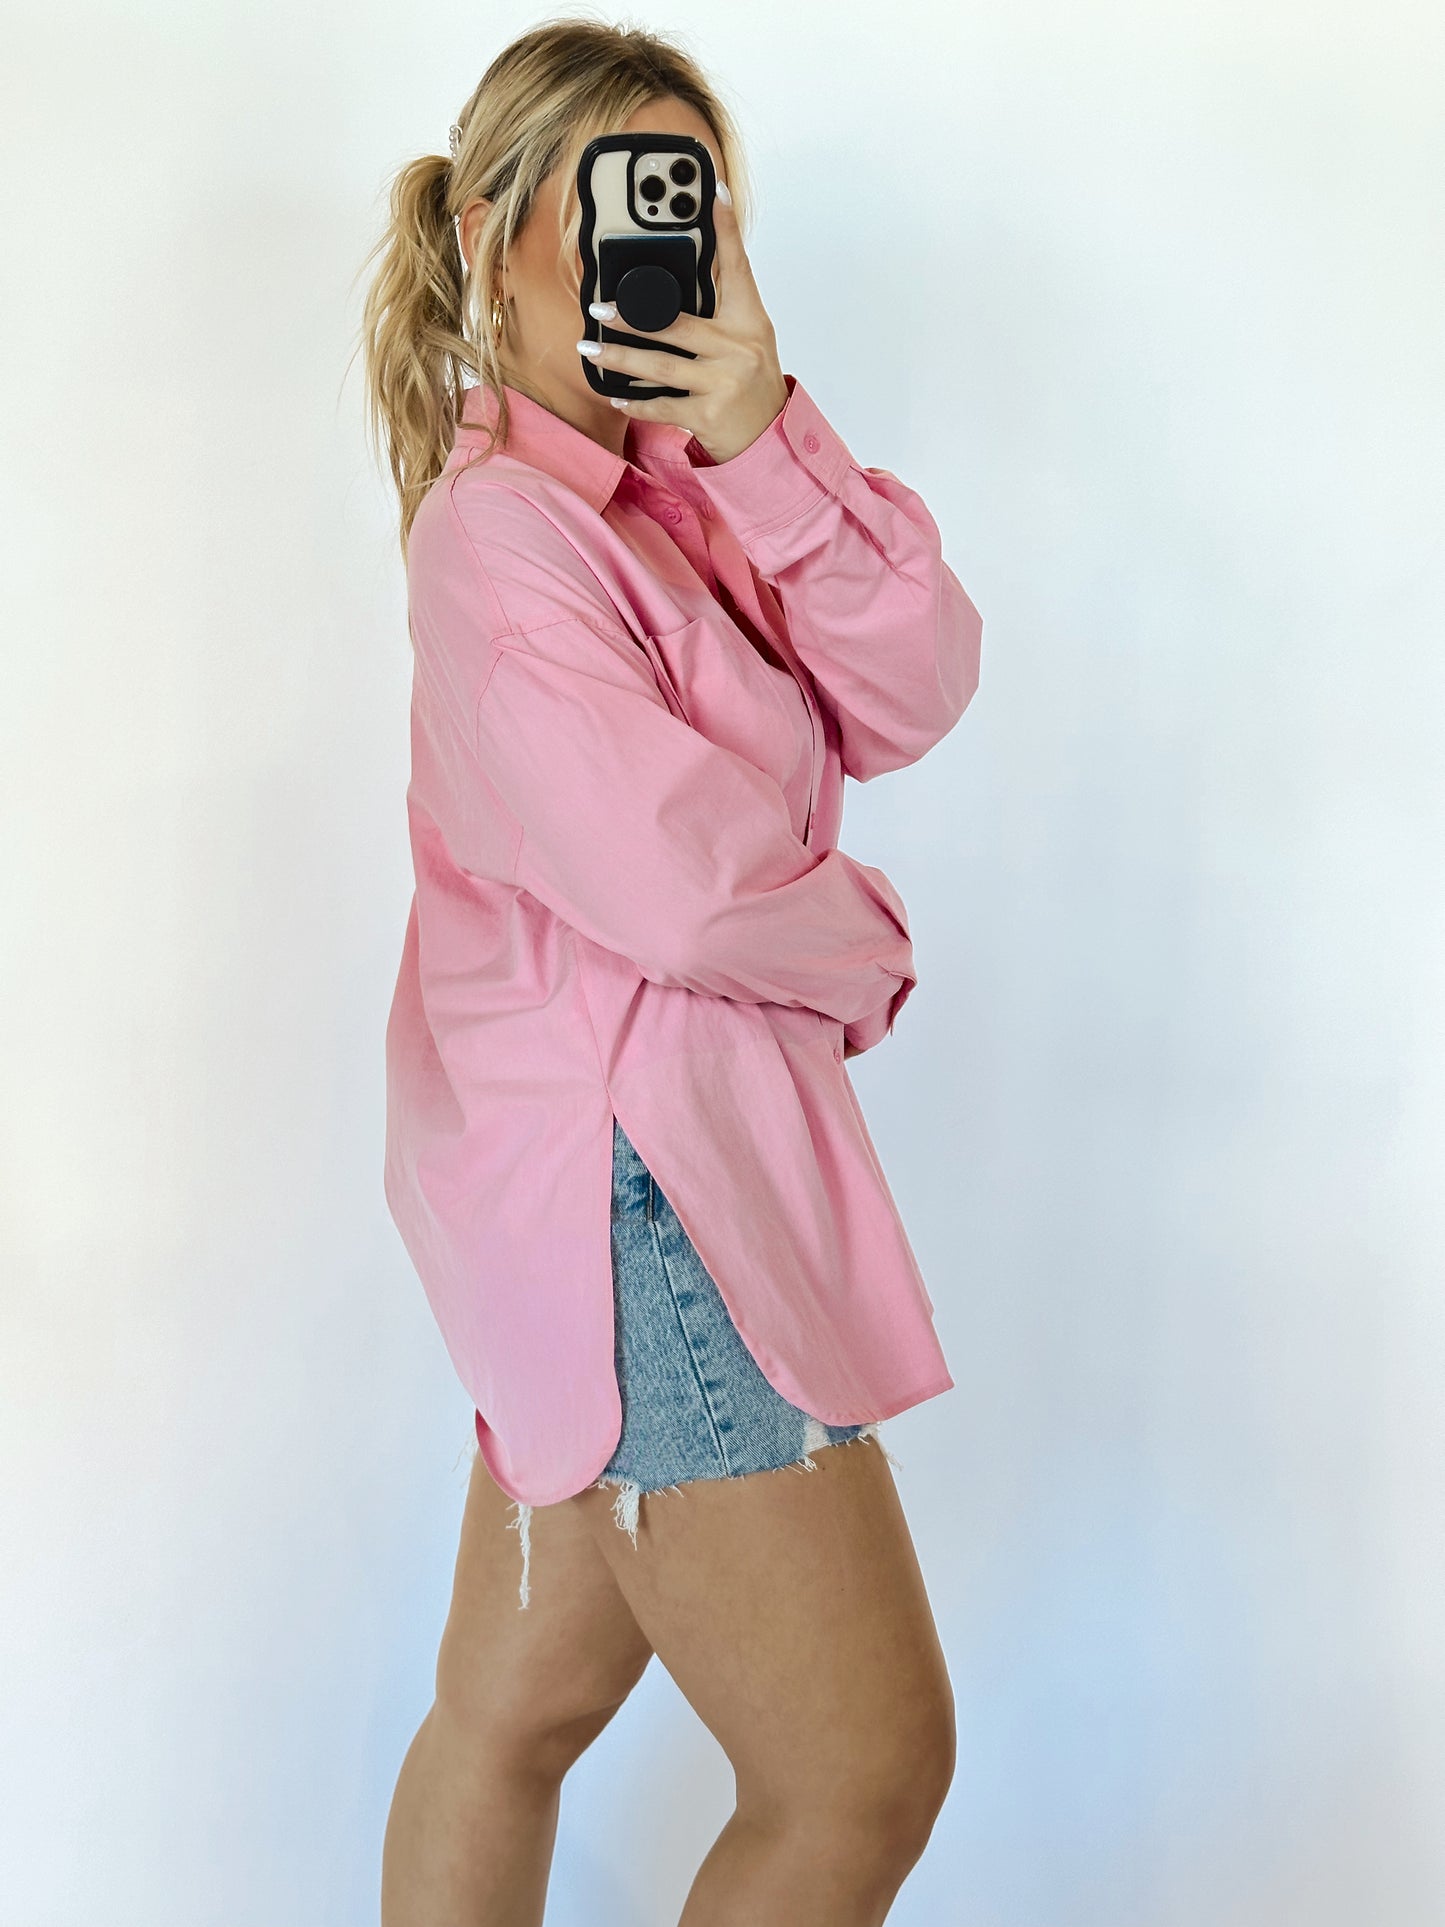 The Elle Pink Button Up Top